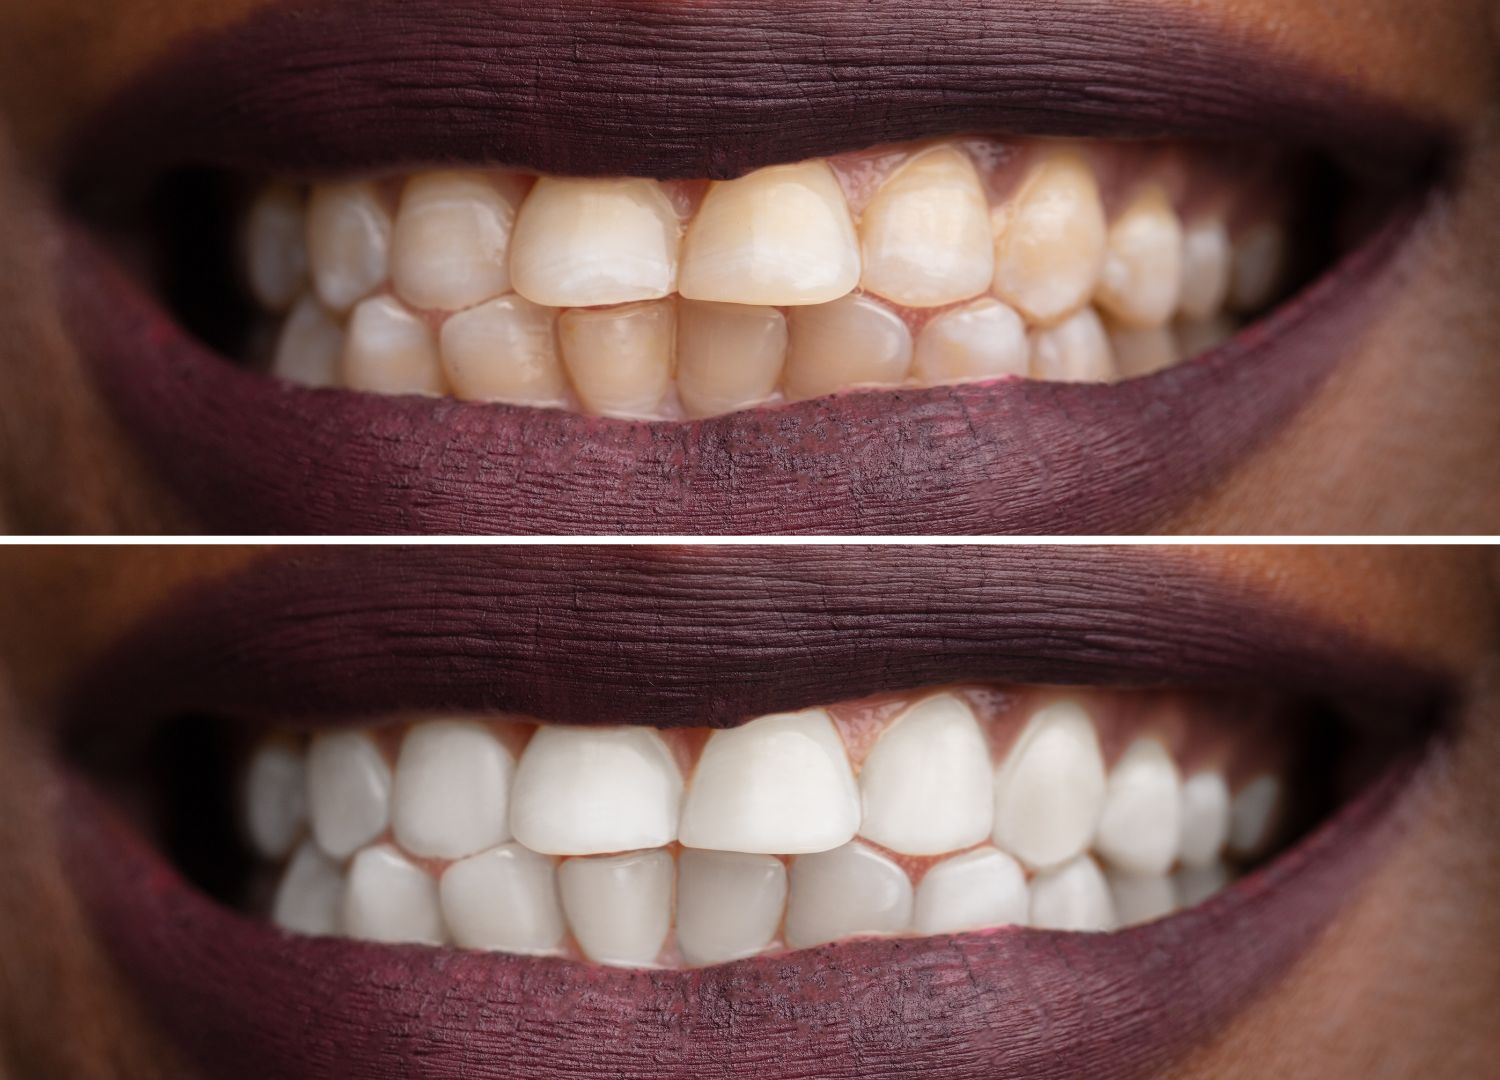 " 7 Things you should know about  teeth whitening (pidgin)"